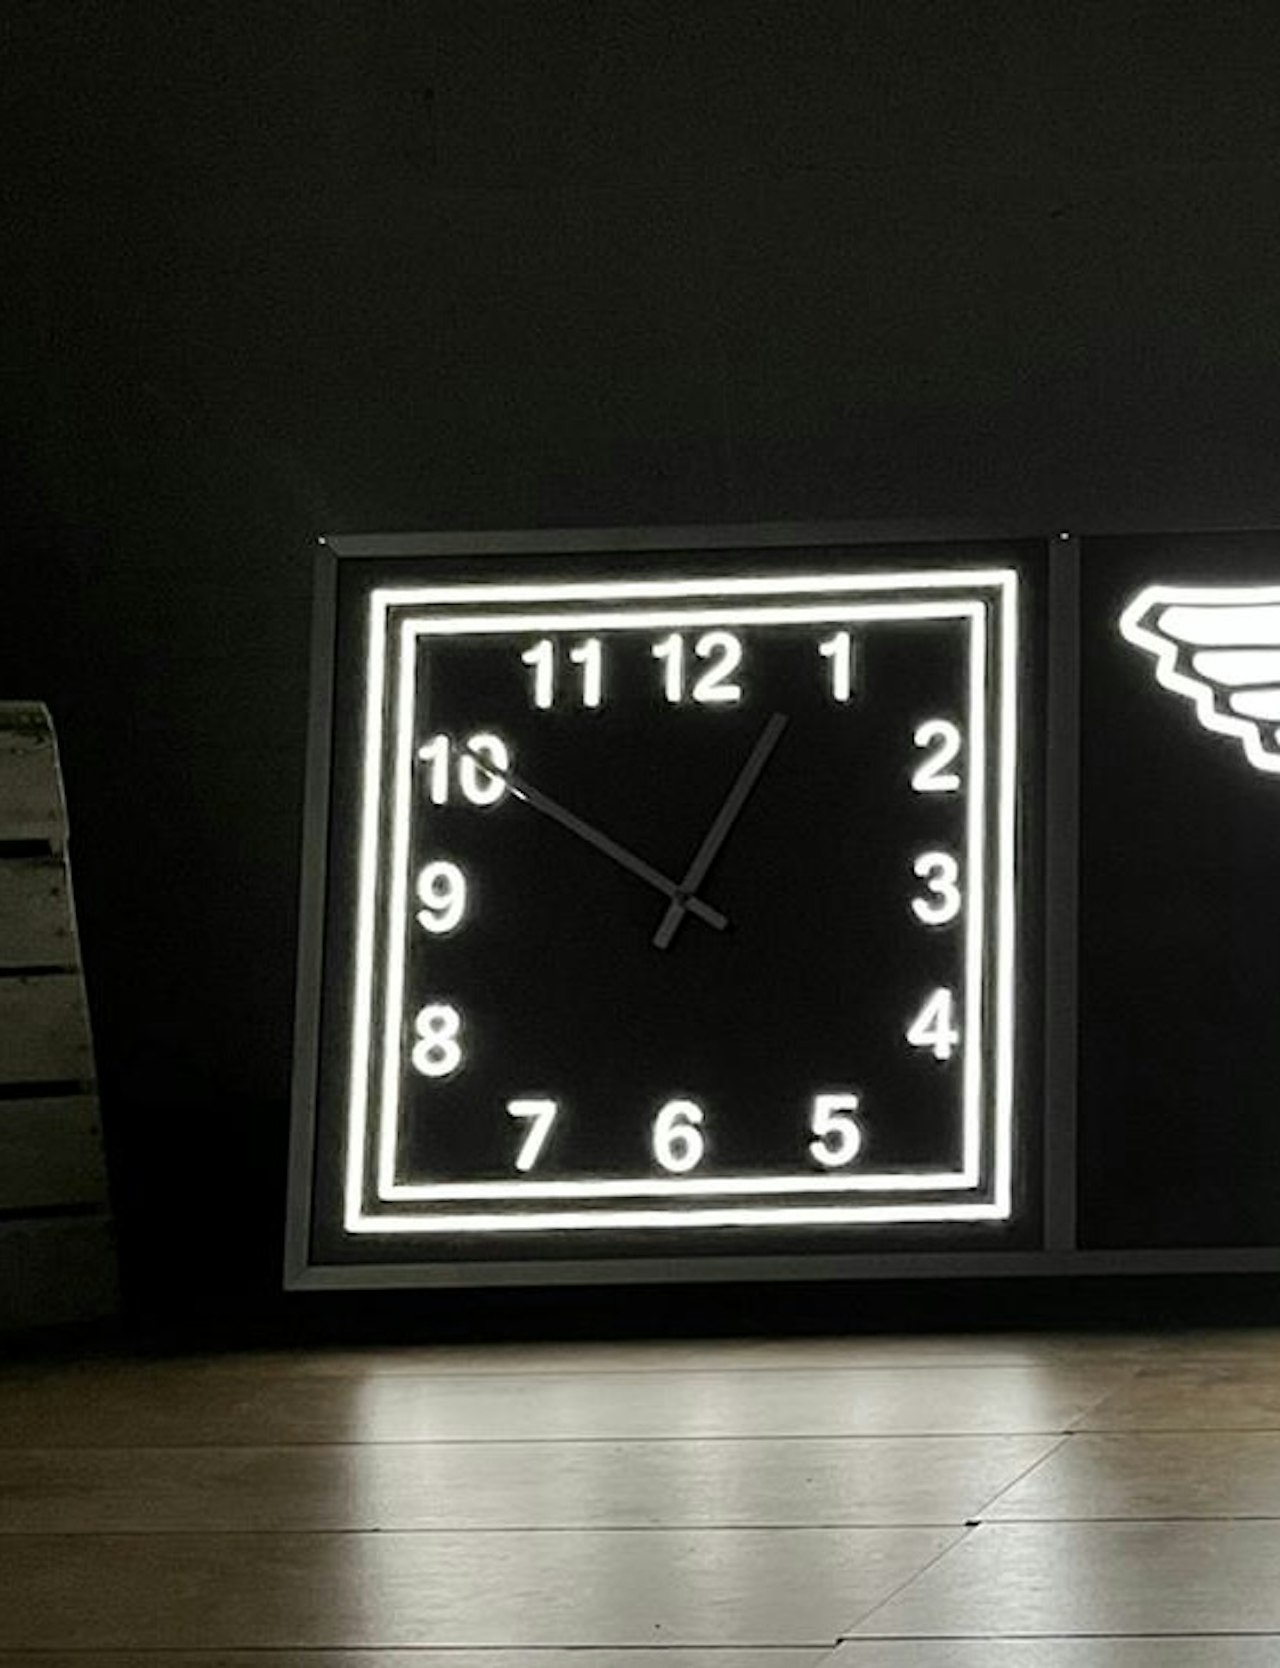 BENTLEY CLOCK ILLUMINATED SIGN for sale by auction in Glastonbury